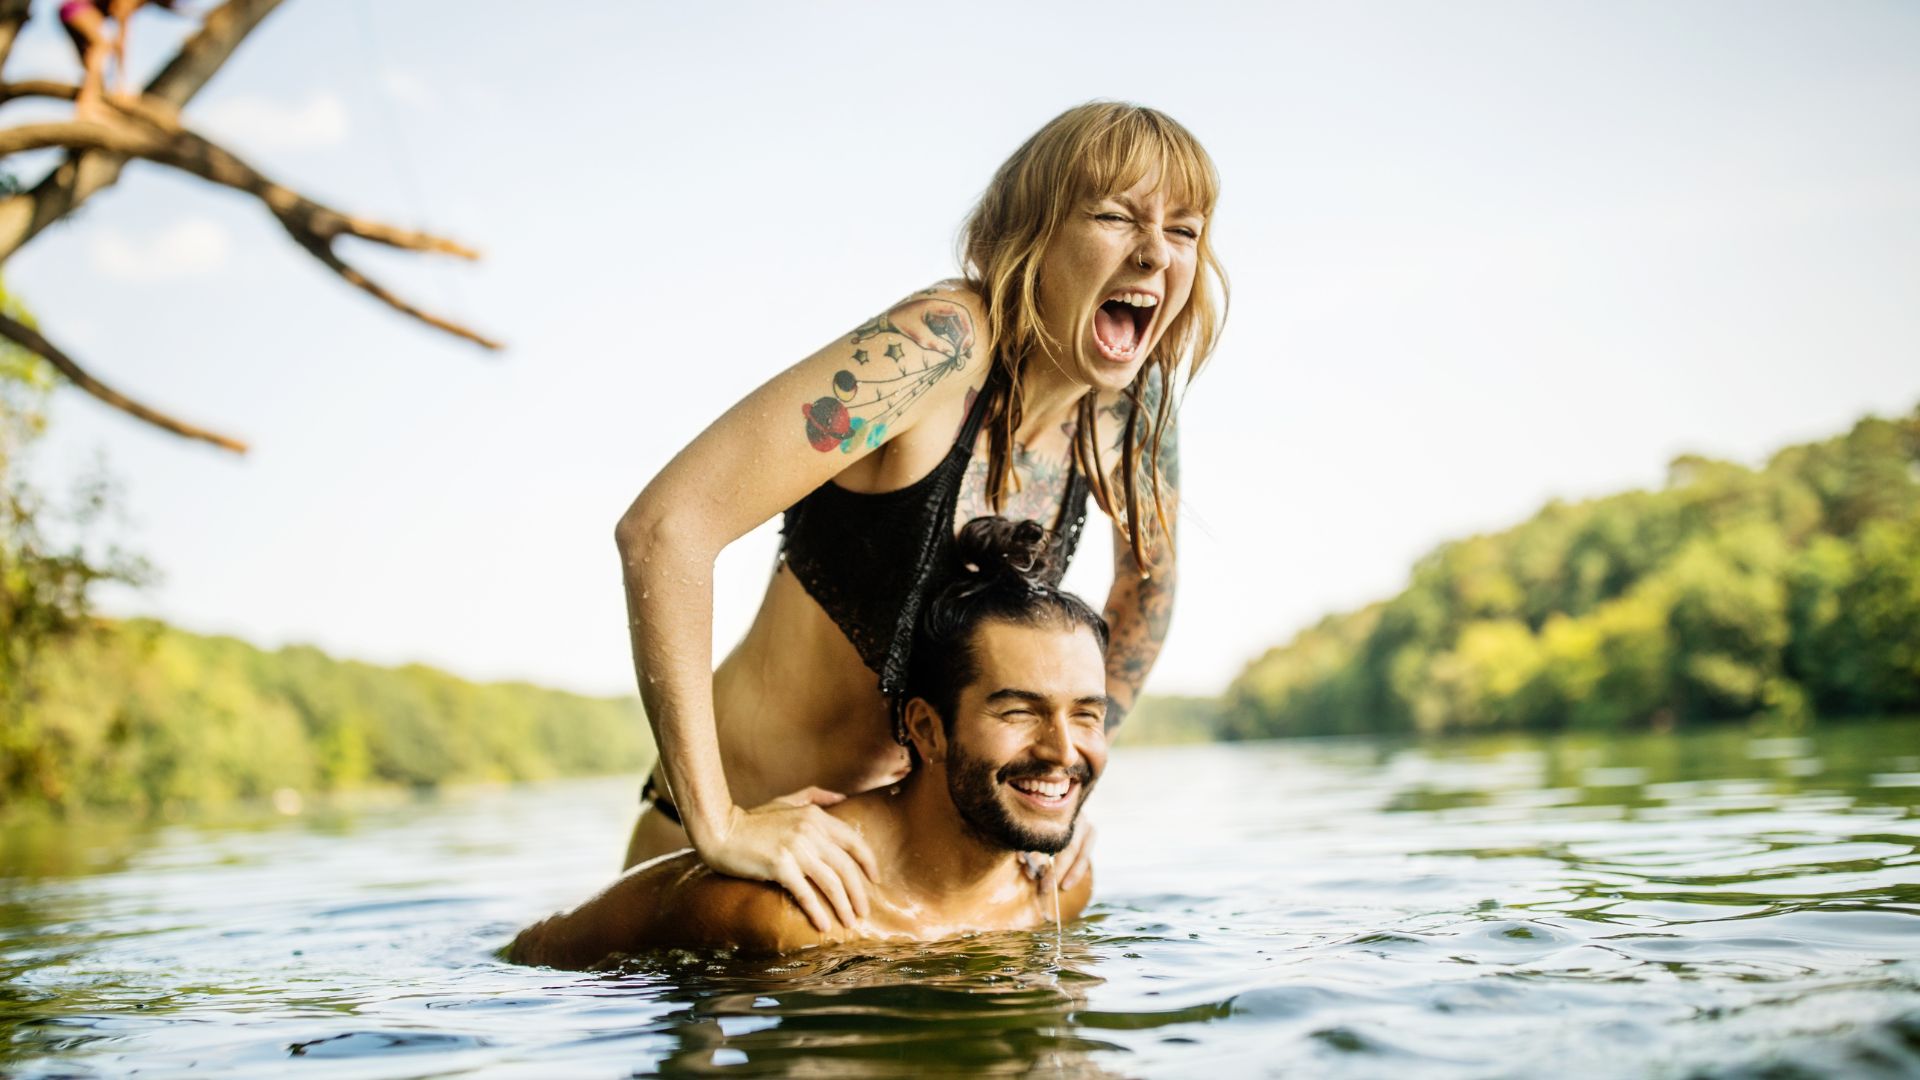 a woman lifts herself up on a man's shoulders as they're both swimming in a river